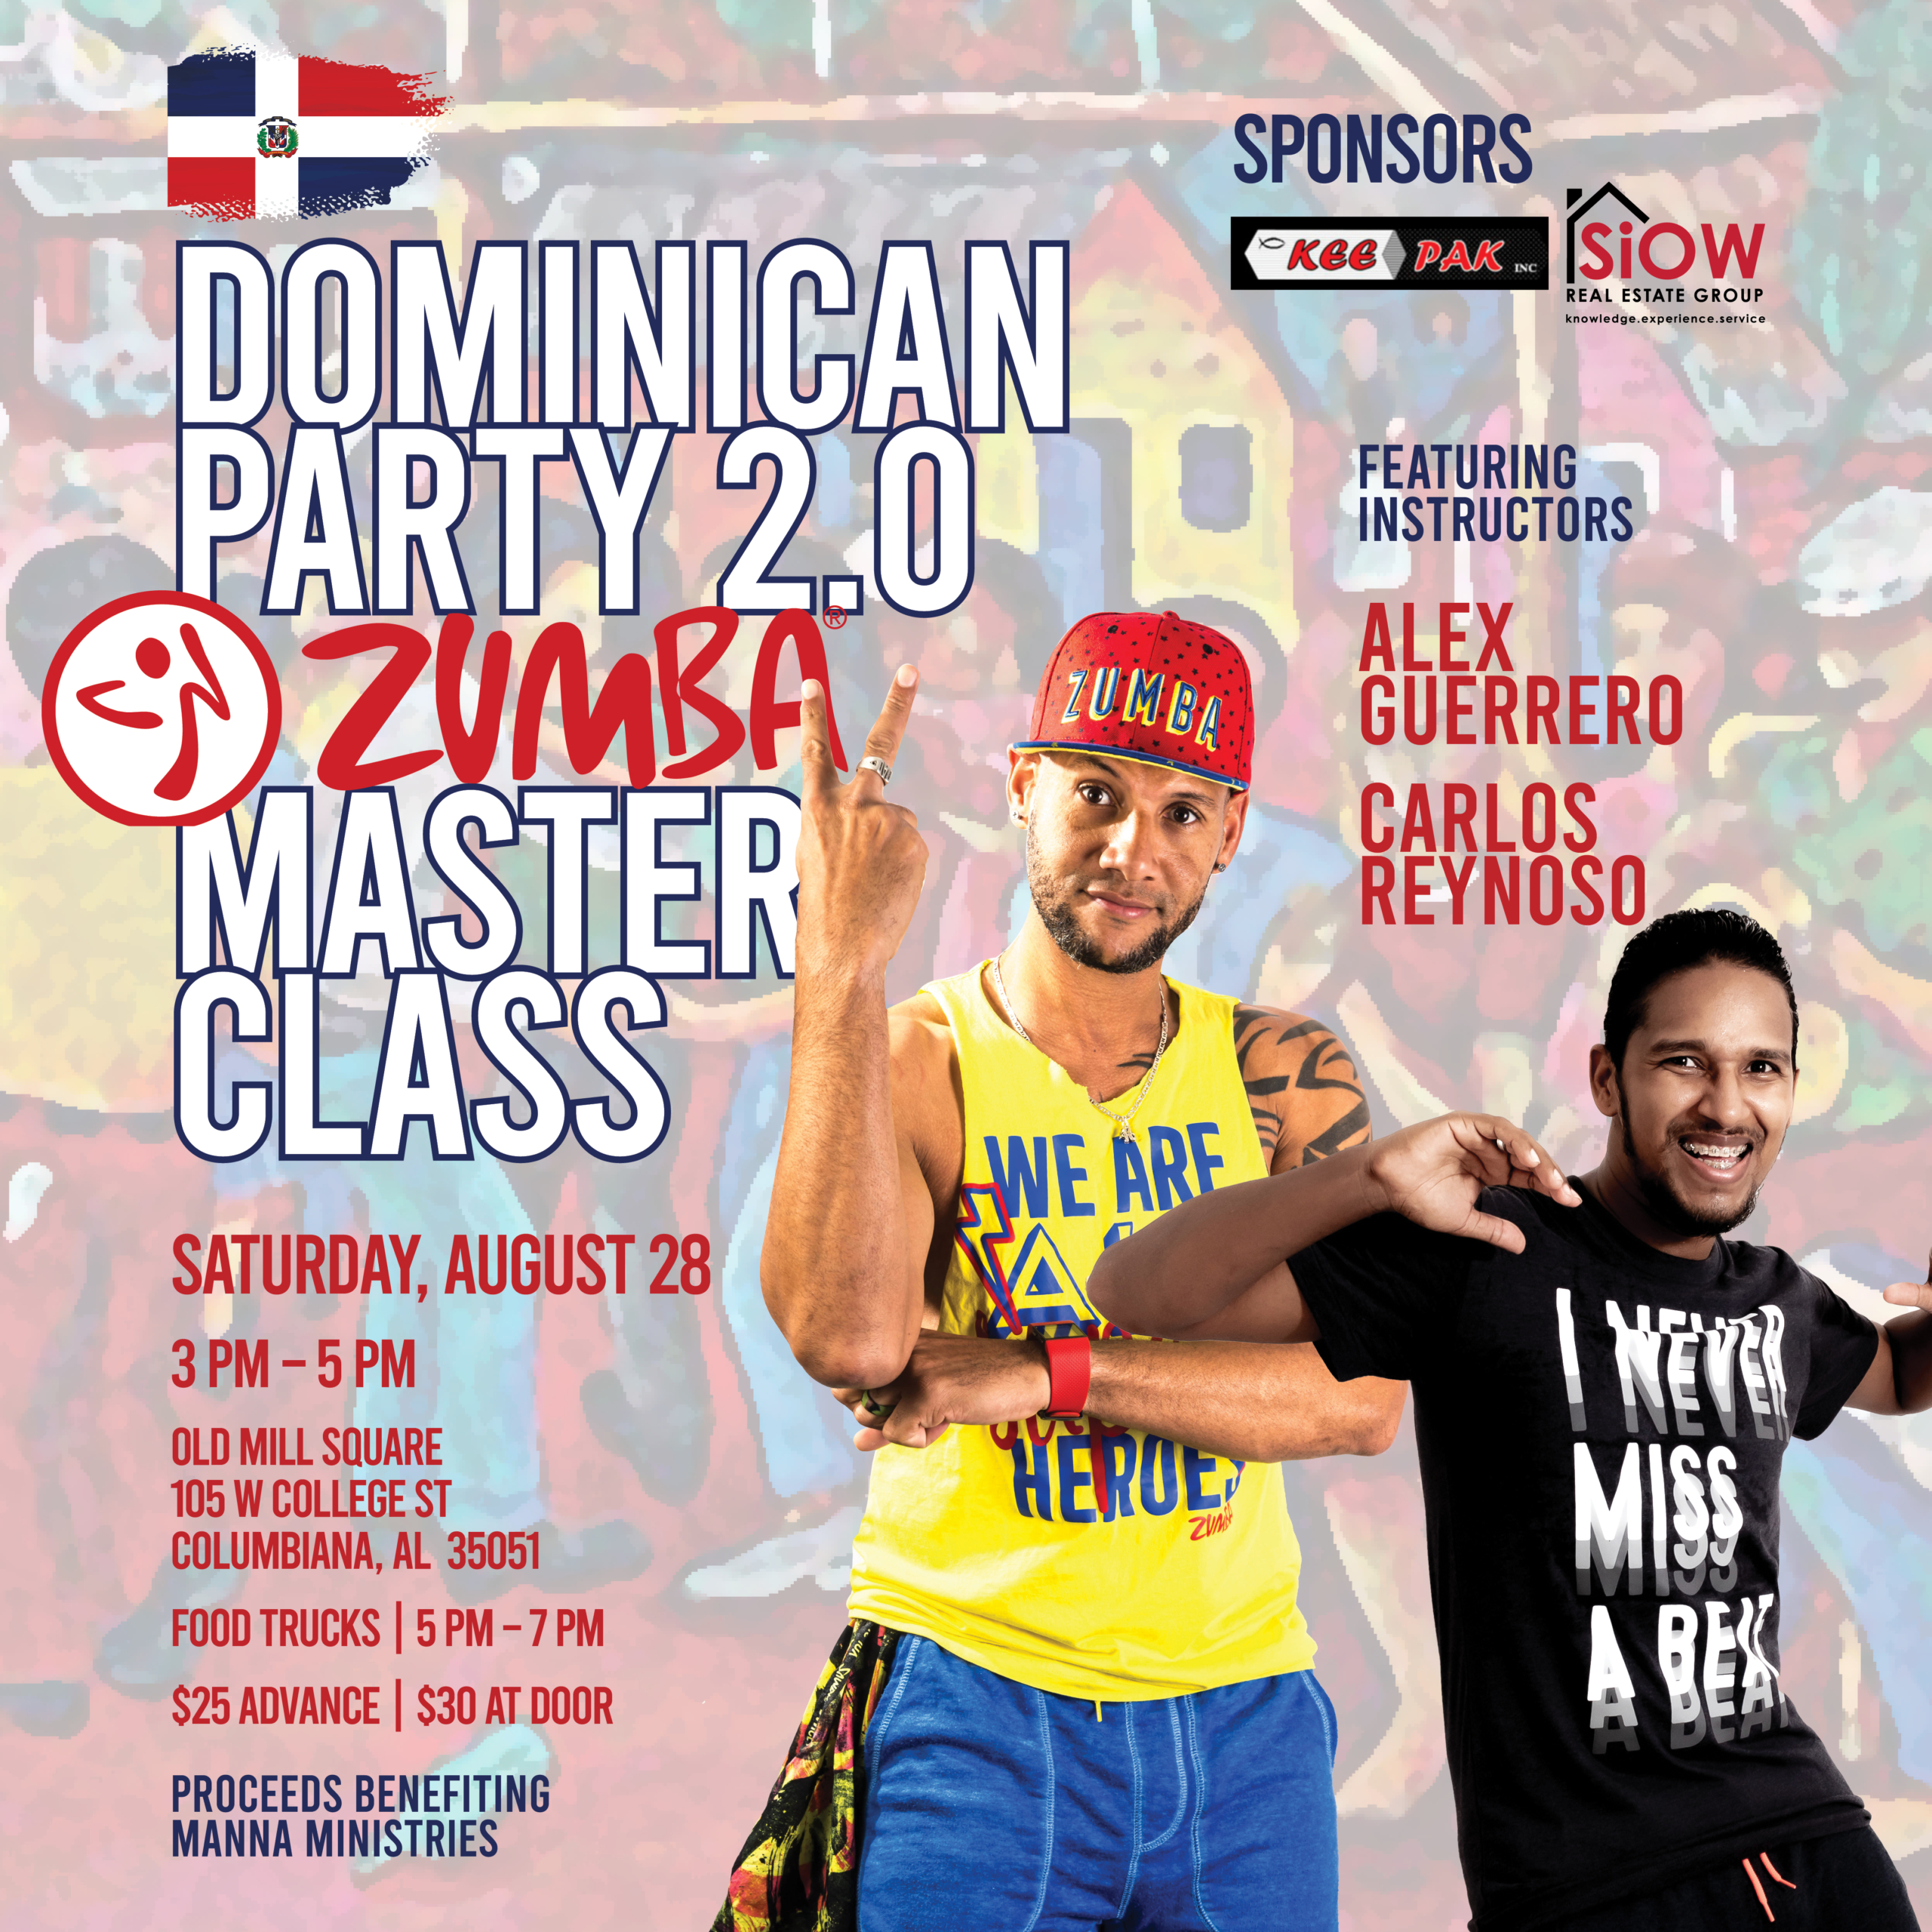 Dominican 2.0 Instagram scaled Dominican Party 2.0 Zumba Master Class Fundraiser